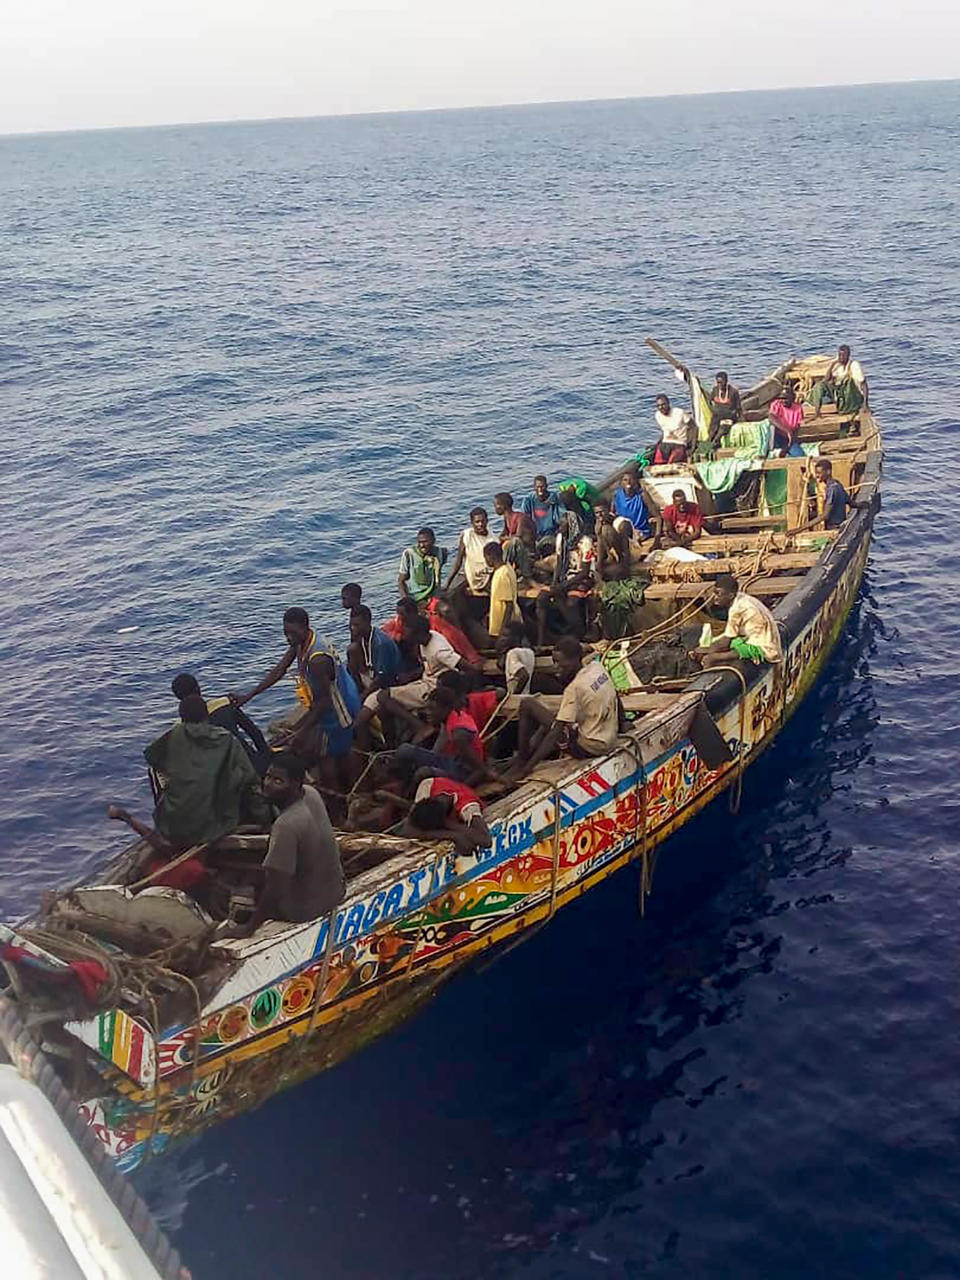 Survivors, mostly from Senegal, are seen inside a pirogue that was found adrift in the Atlantic Ocean by a Spanish fishing vessel near Cape Verde on August 14, 2023. The boat had set off from Senegal on July 10 to try to reach Spain's Canary Islands with more than 100 people on board, officials said, but only 38 people survived and more than 60 are feared dead. (AP Photo)